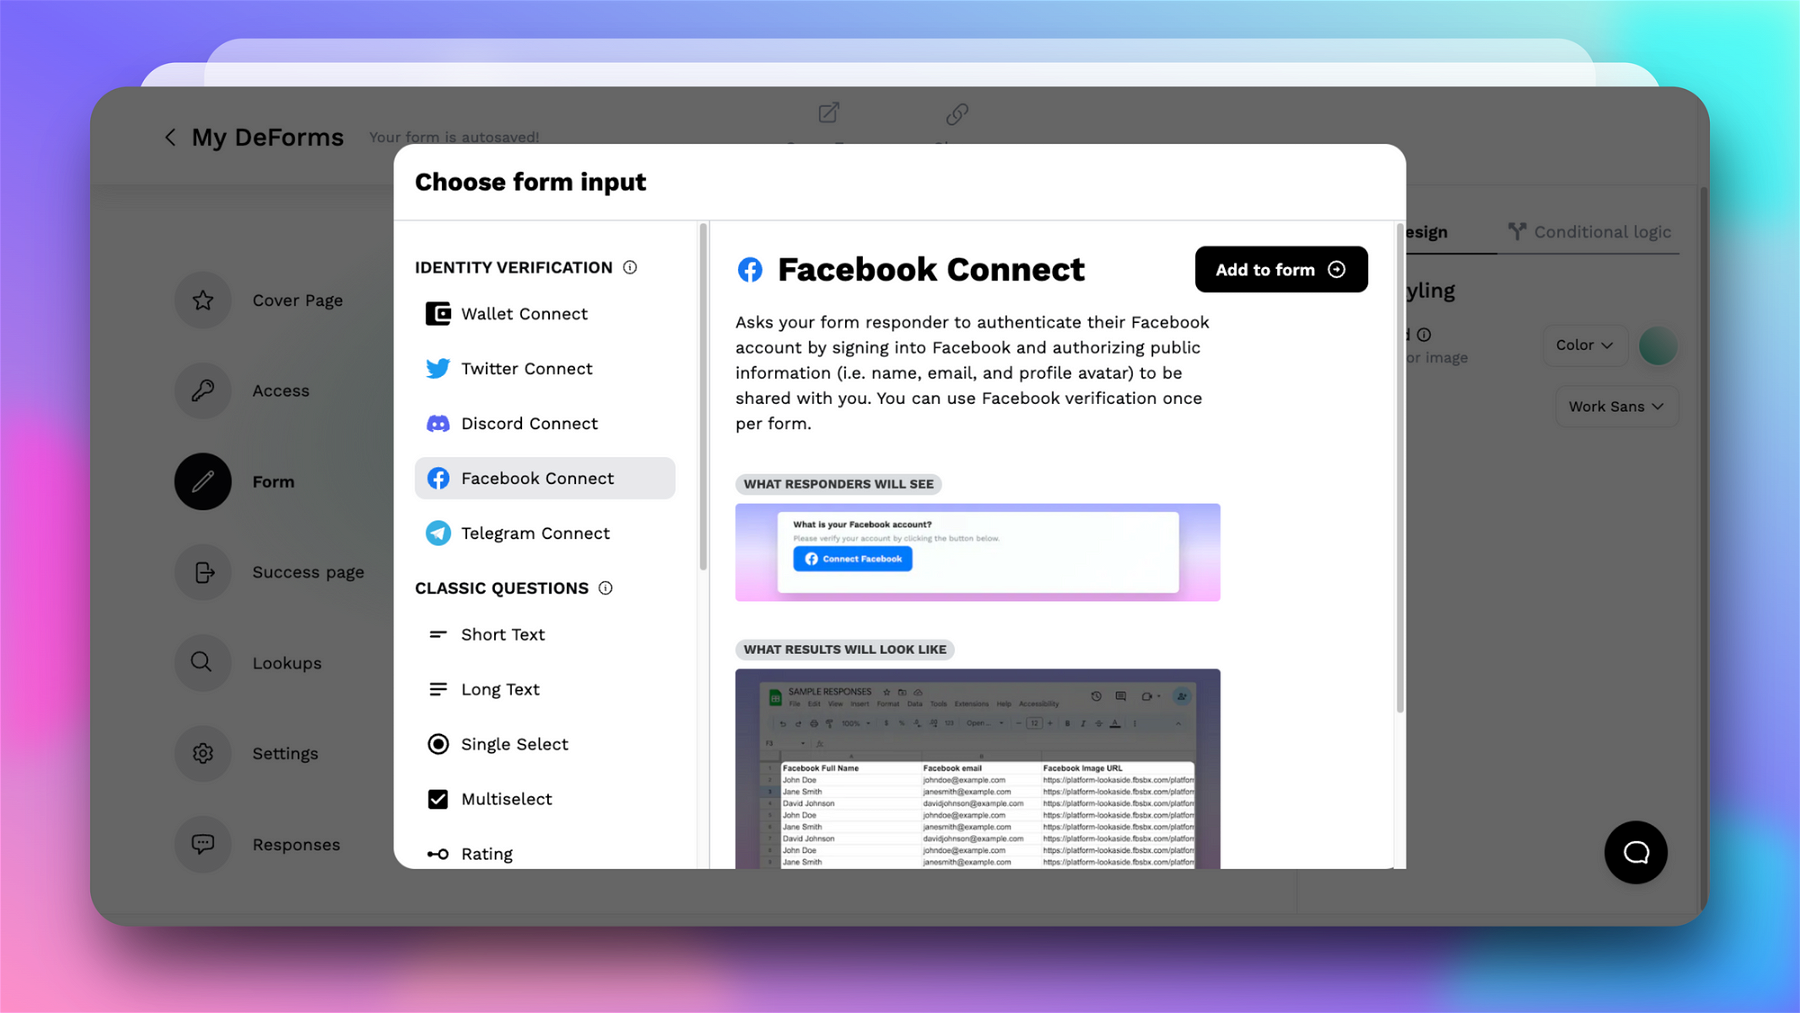 Using Facebook Connect as identity verification will allow form responders to authenticate using their Facebook account. With this method, public information like name, email, and profile avatar will be shared with you.